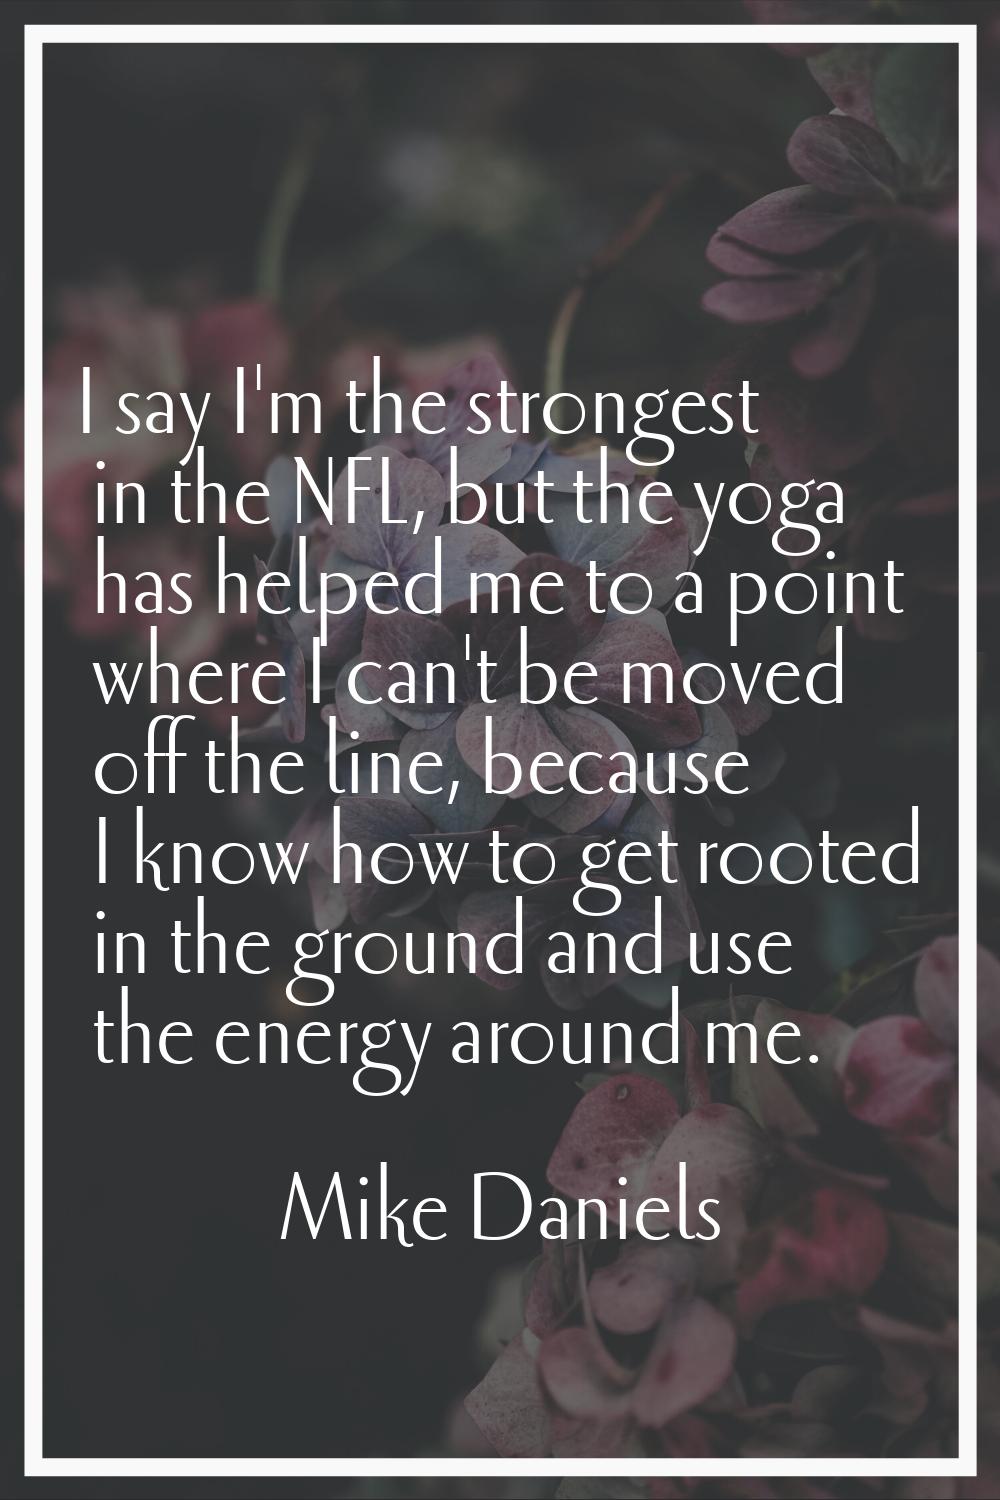 I say I'm the strongest in the NFL, but the yoga has helped me to a point where I can't be moved of